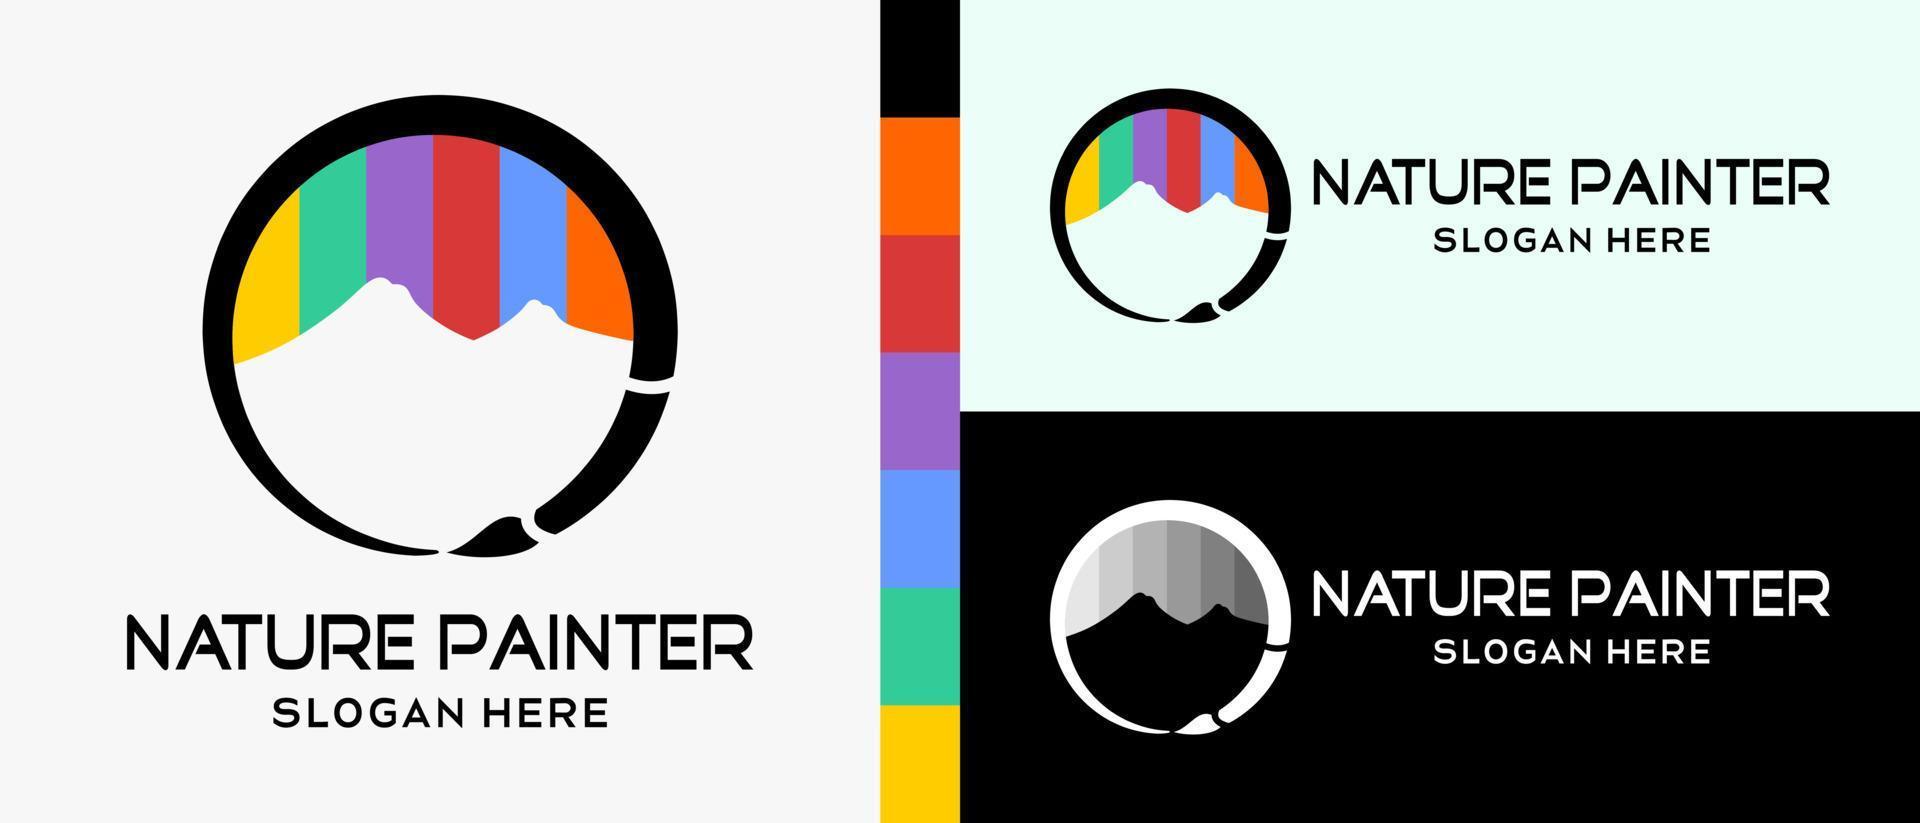 Painting brush logo design template and mountain icon with creative concept of rainbow colors in a circle. premium vector logo illustration